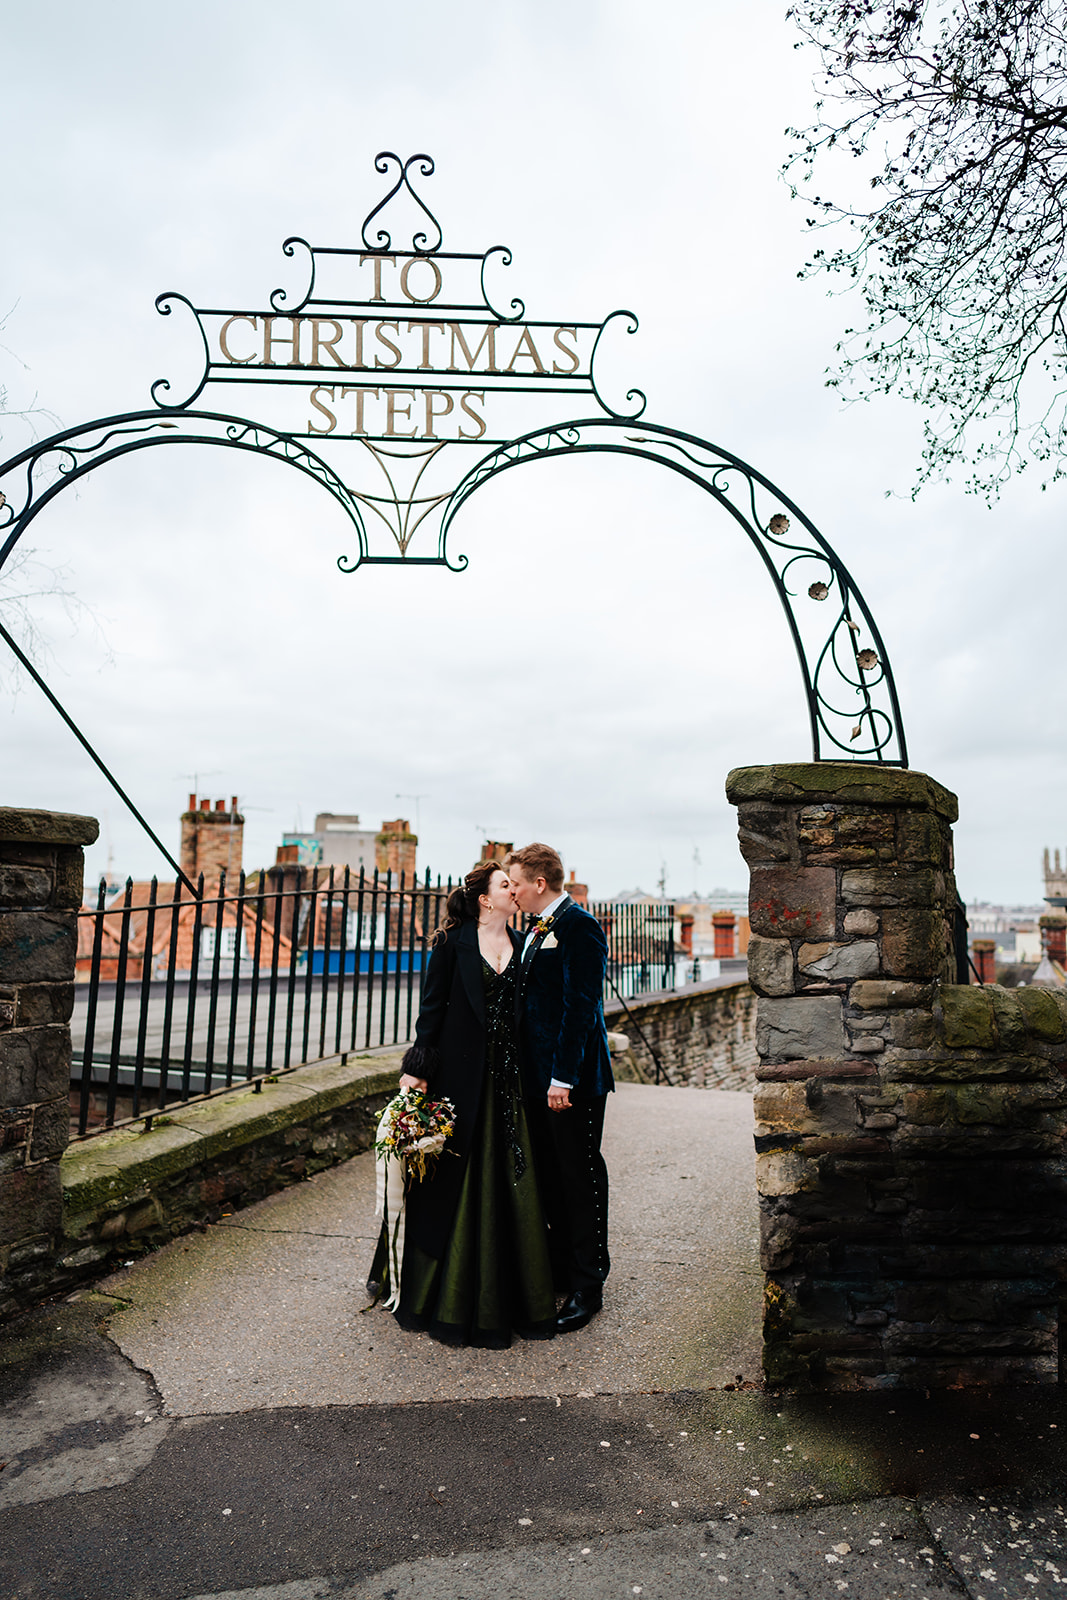 wedding couple by the Christmas Steps in bristol